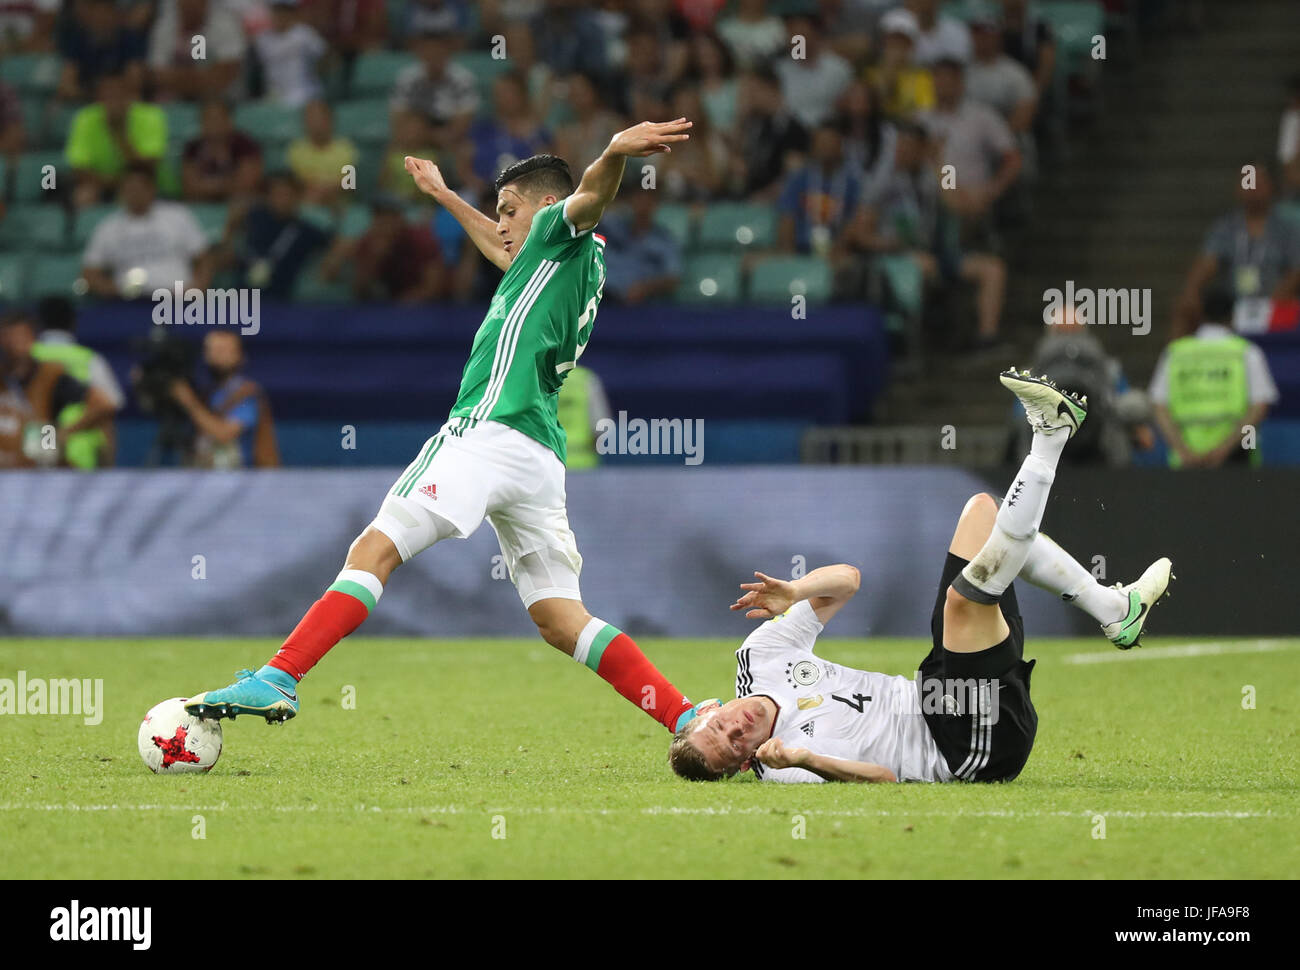 Sochi, Russia. 29th June, 2017. Matthias Ginter (R) of Germany vies with Raul Jimenez of Mexico during the semifinal match of the 2017 FIFA Confederations Cup in Sochi, Russia, June 29, 2017. Germany won 4-1. Credit: Xu Zijian/Xinhua/Alamy Live News Stock Photo